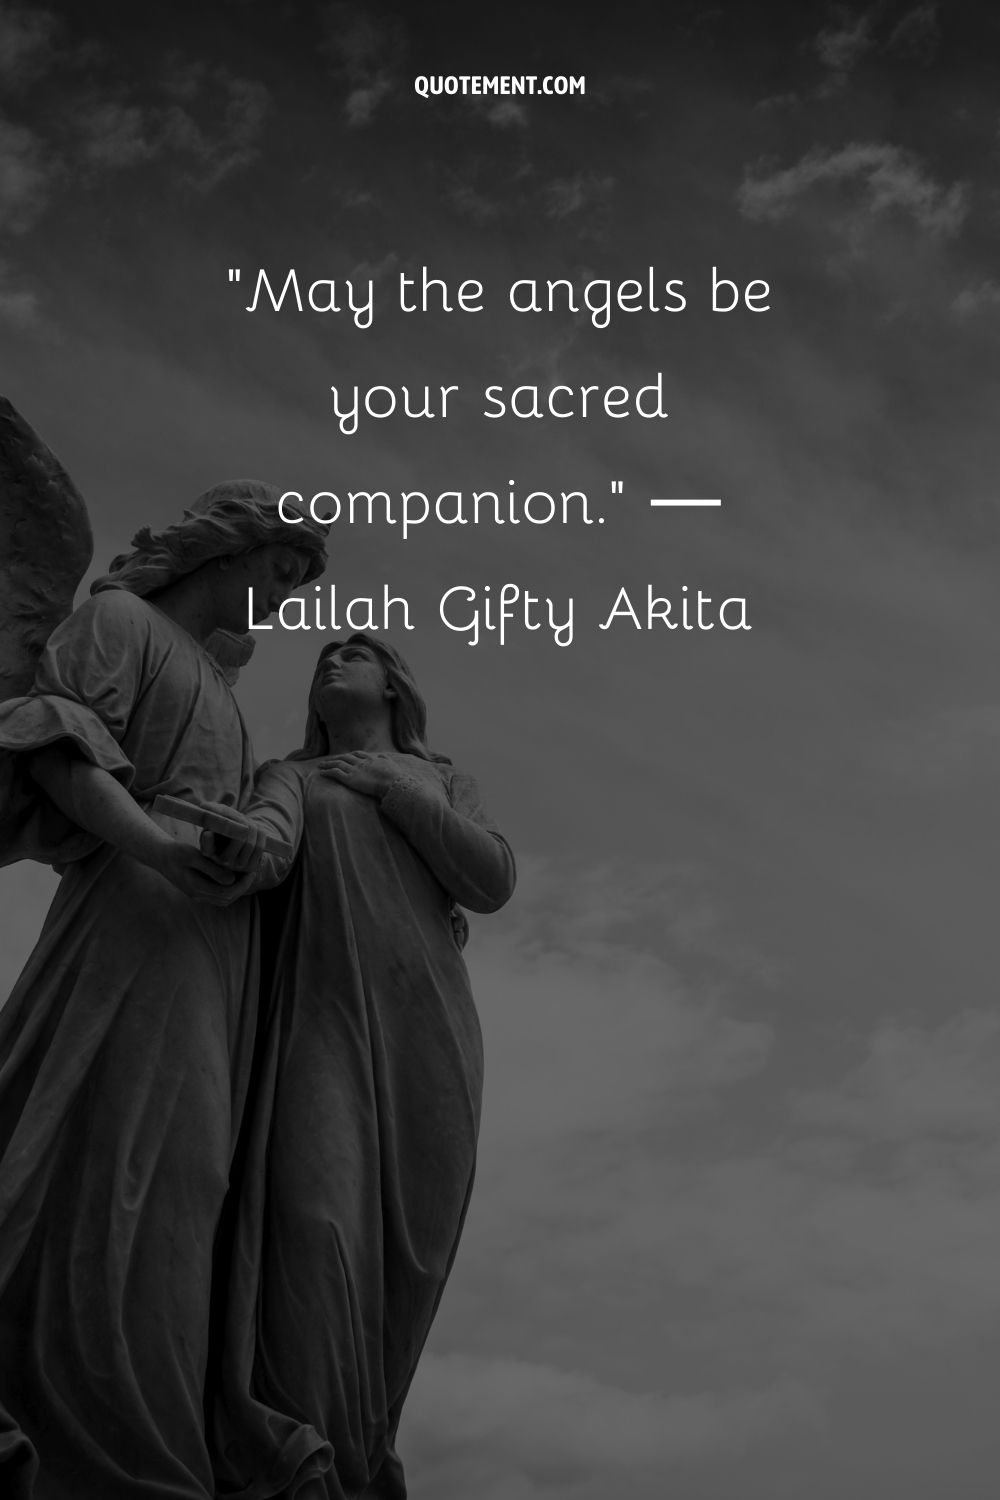 May the angels be your sacred companion.